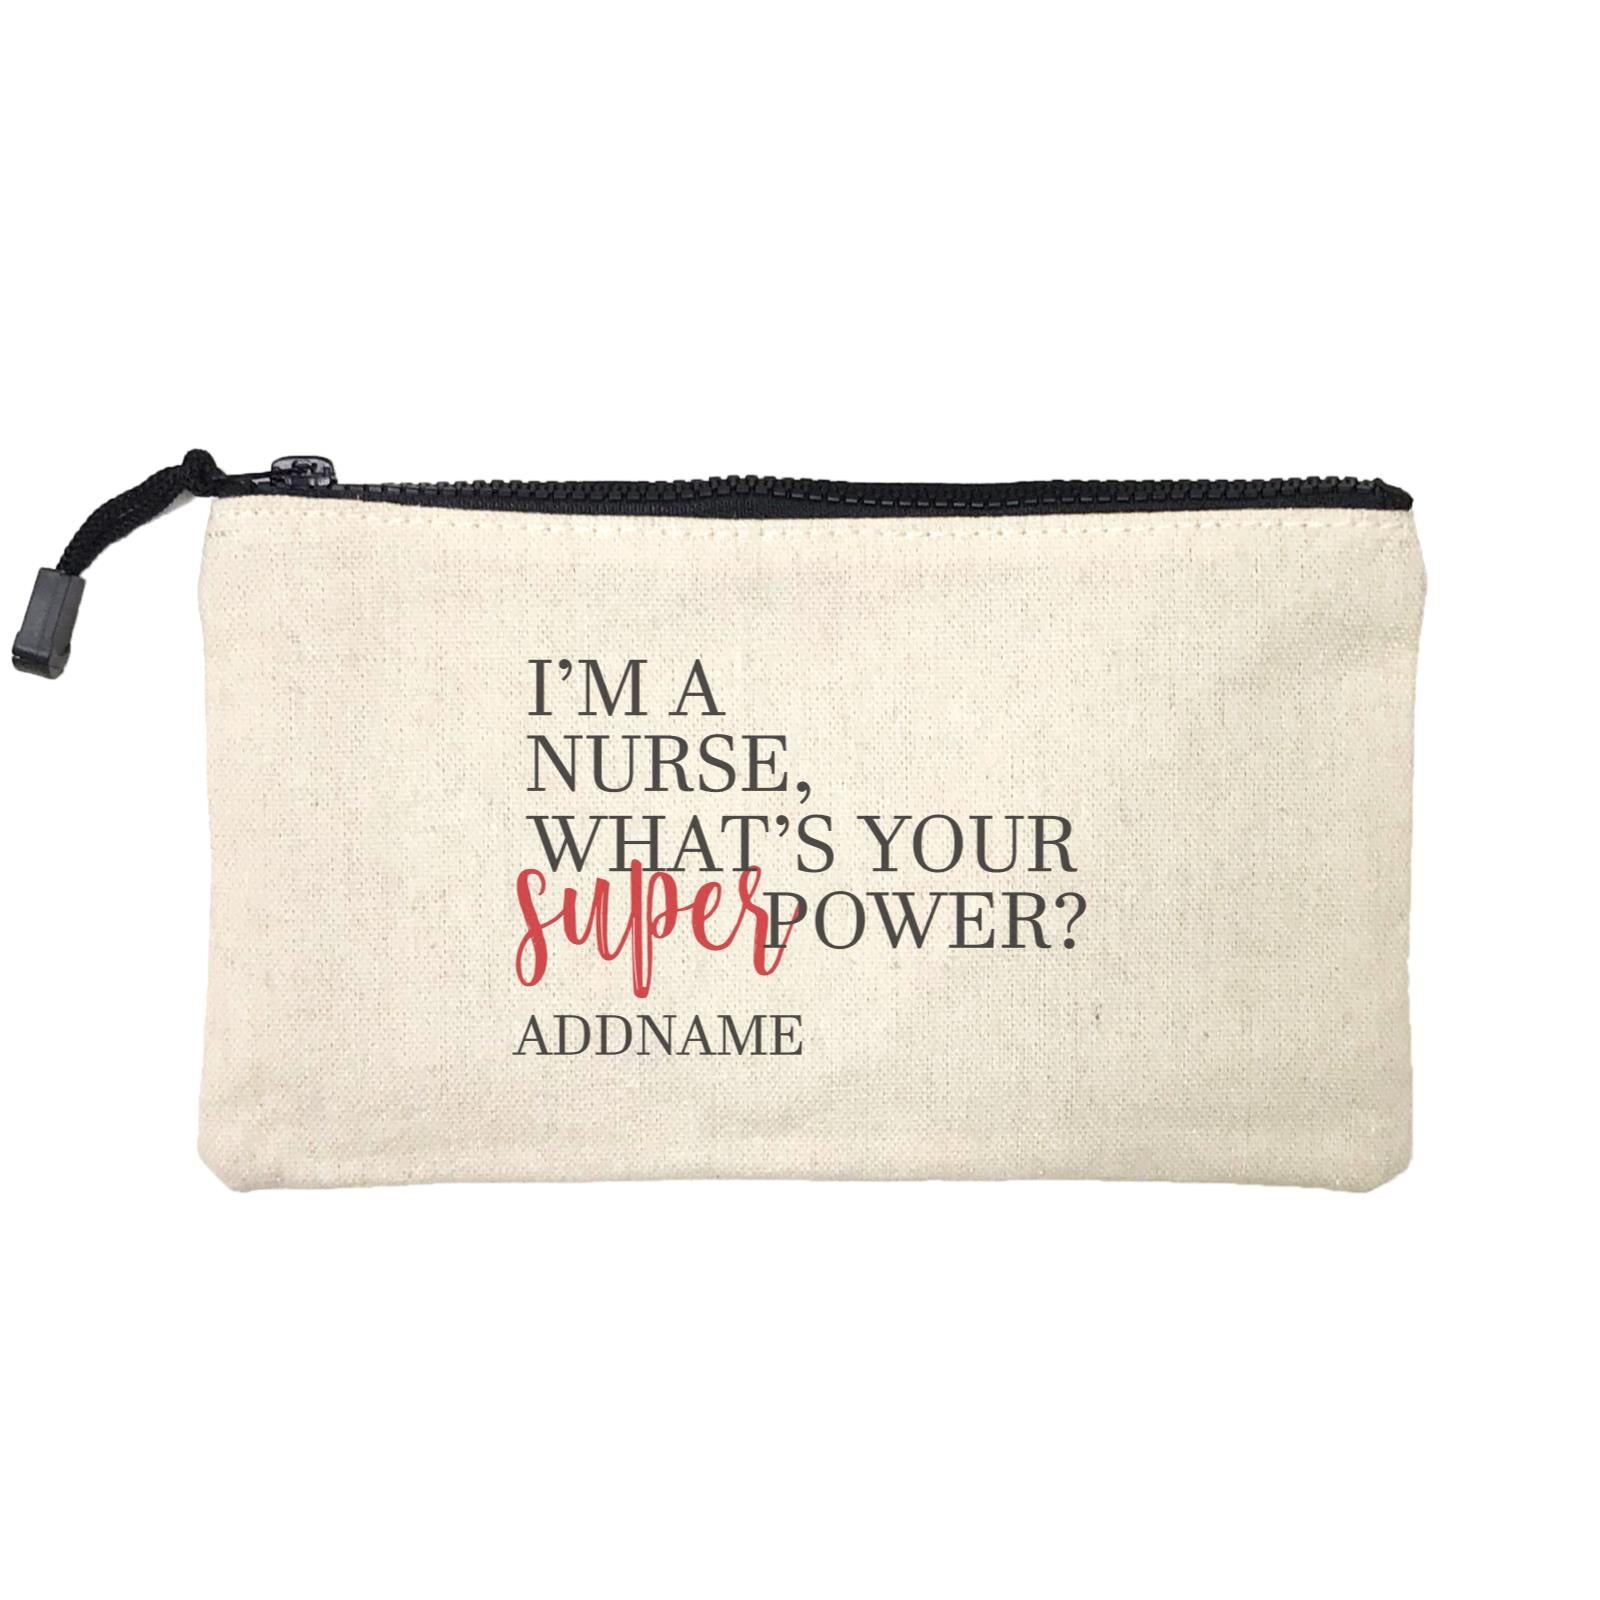 I'm A Nurse, What's Your Superpower Mini Accessories Stationery Pouch